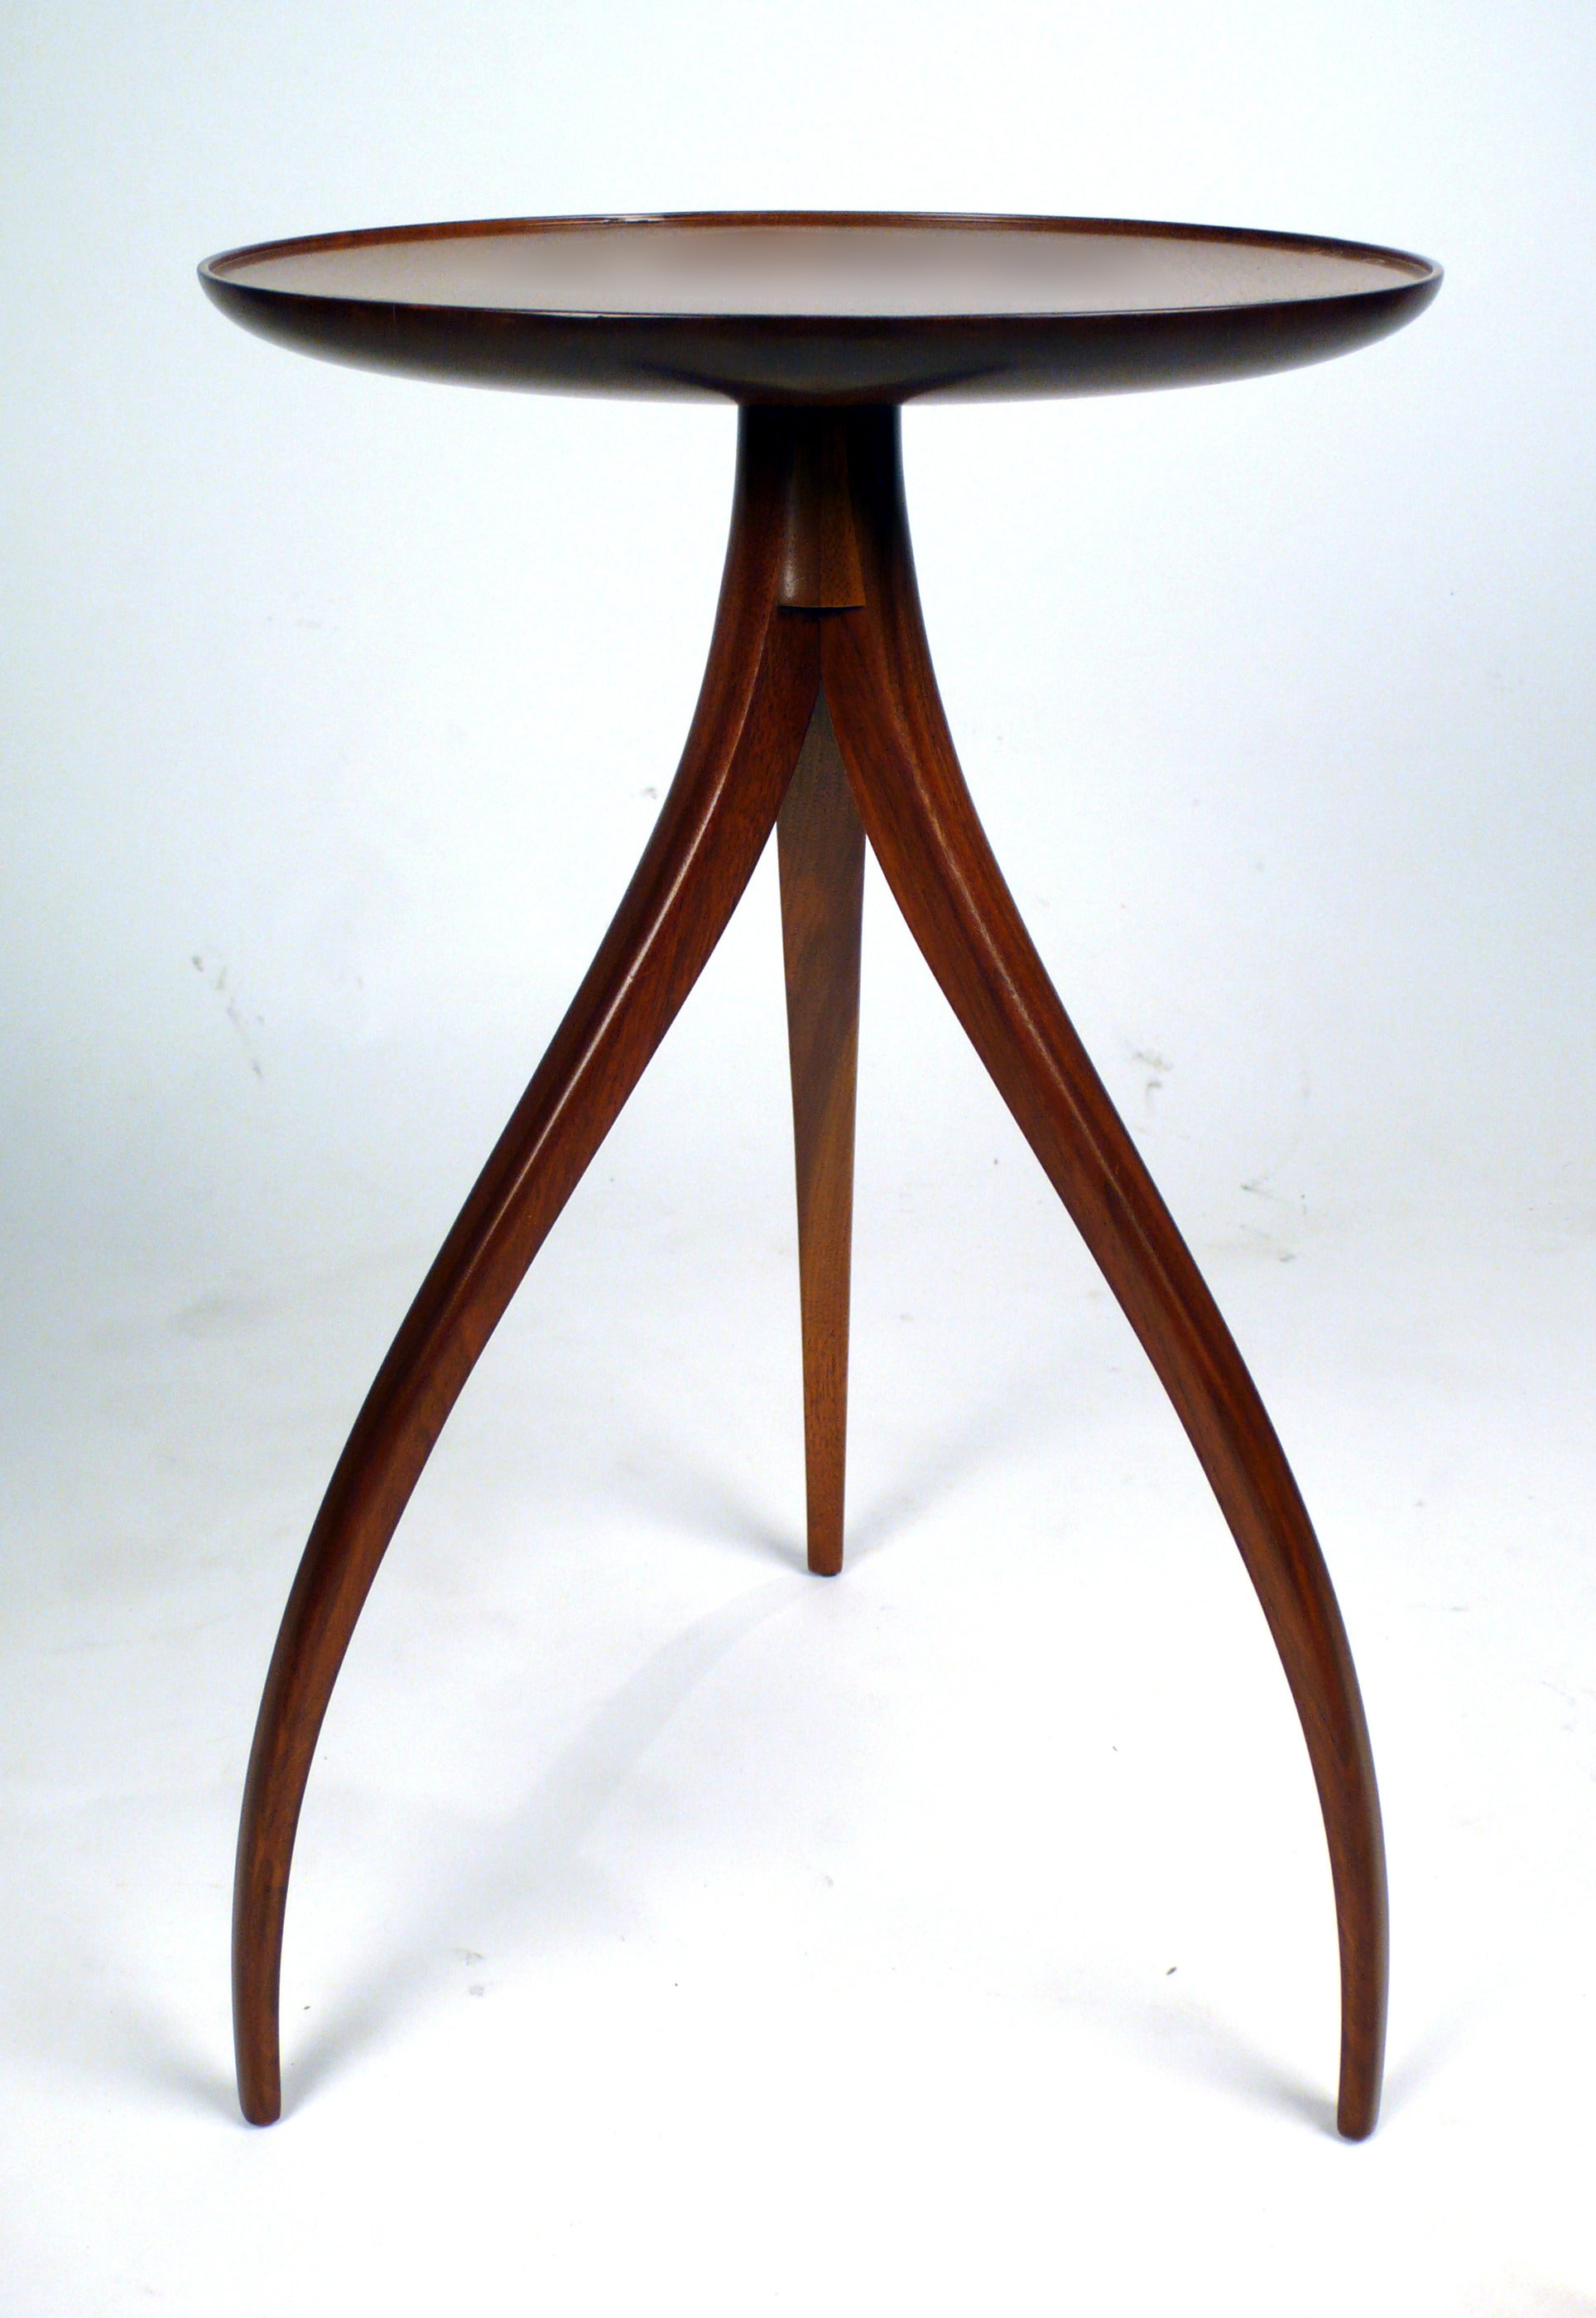 Sculptural Side Table by Edward Wormley for Dunbar